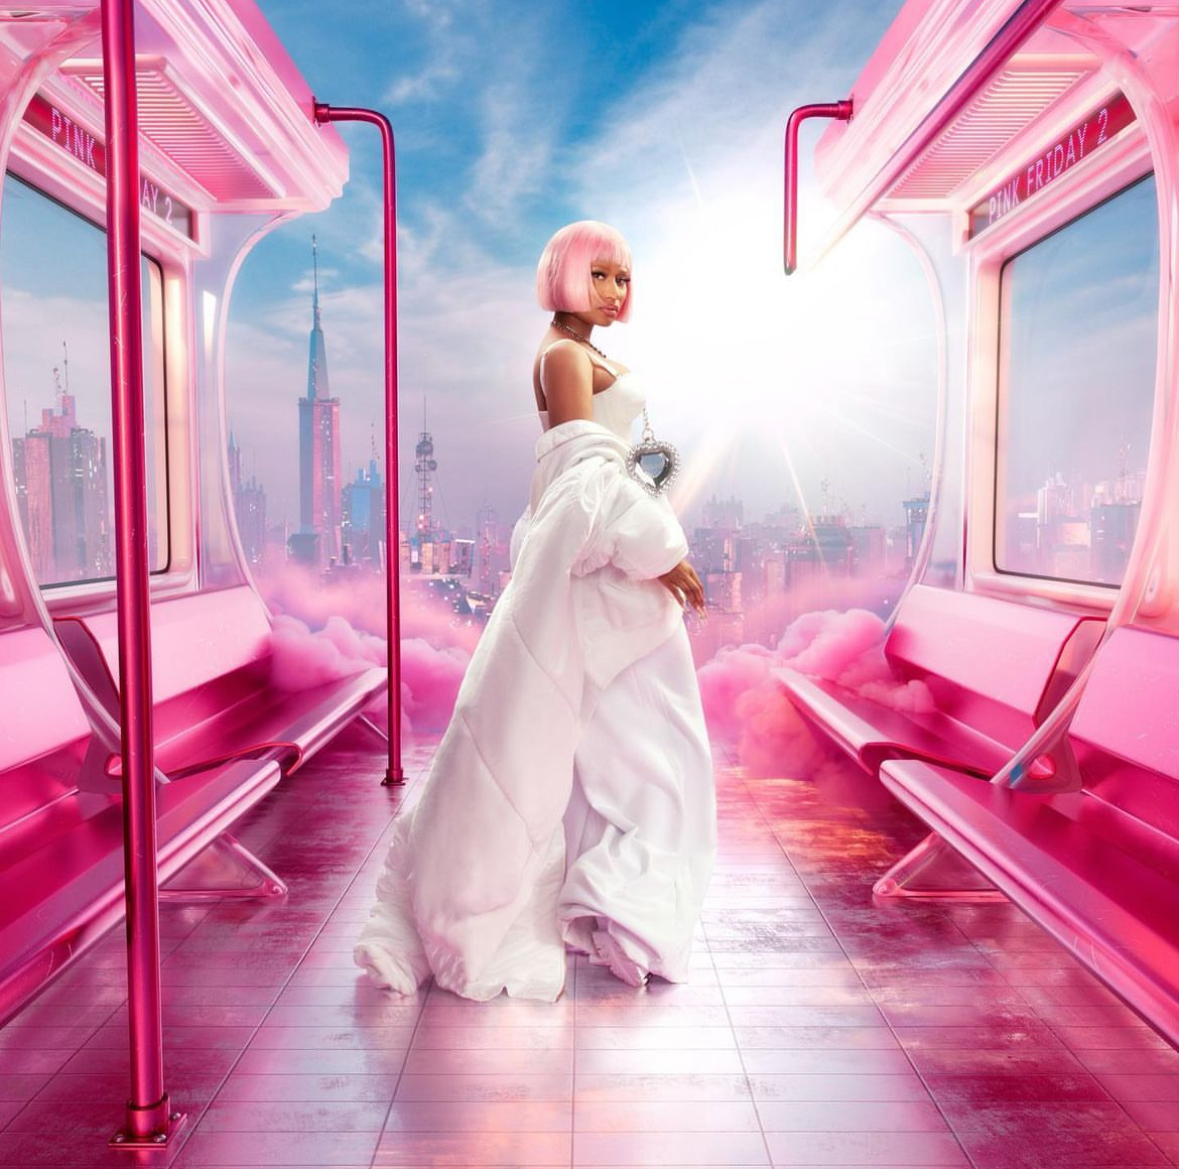 On Friday, Dec. 8, Nicki Minaj ended her five-year-long hiatus from album production with the release of “Pink Friday 2.” Minaj’s new album, a sequel to 2010’s “Pink Friday,” reminds listeners that she never fails to be her most authentic self.